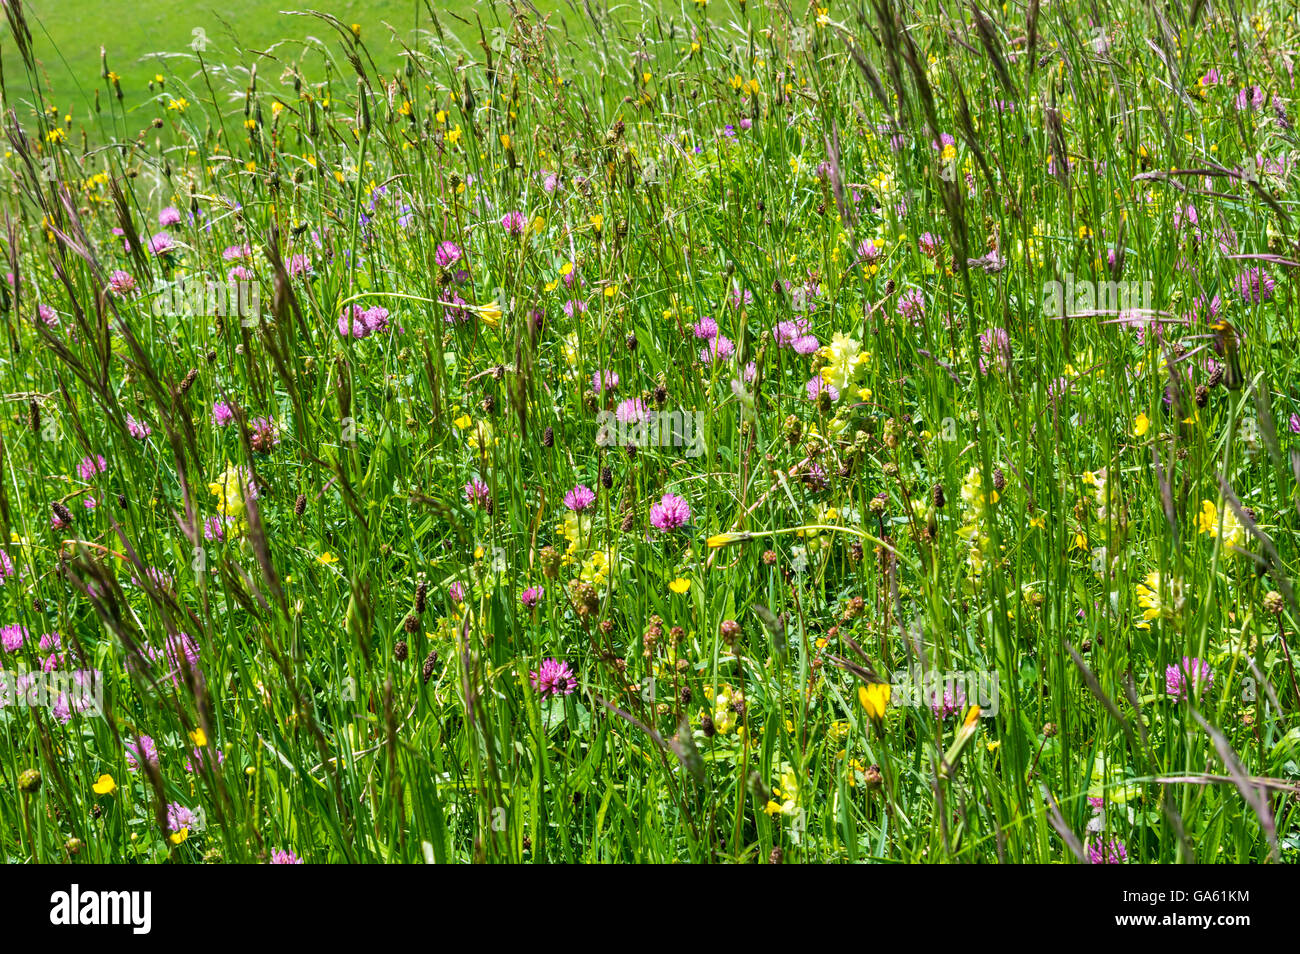 Calcareous or alkaline meadow with different types of grasses and flowers, including red clovers. Berner Oberland, Switzerland. Stock Photo